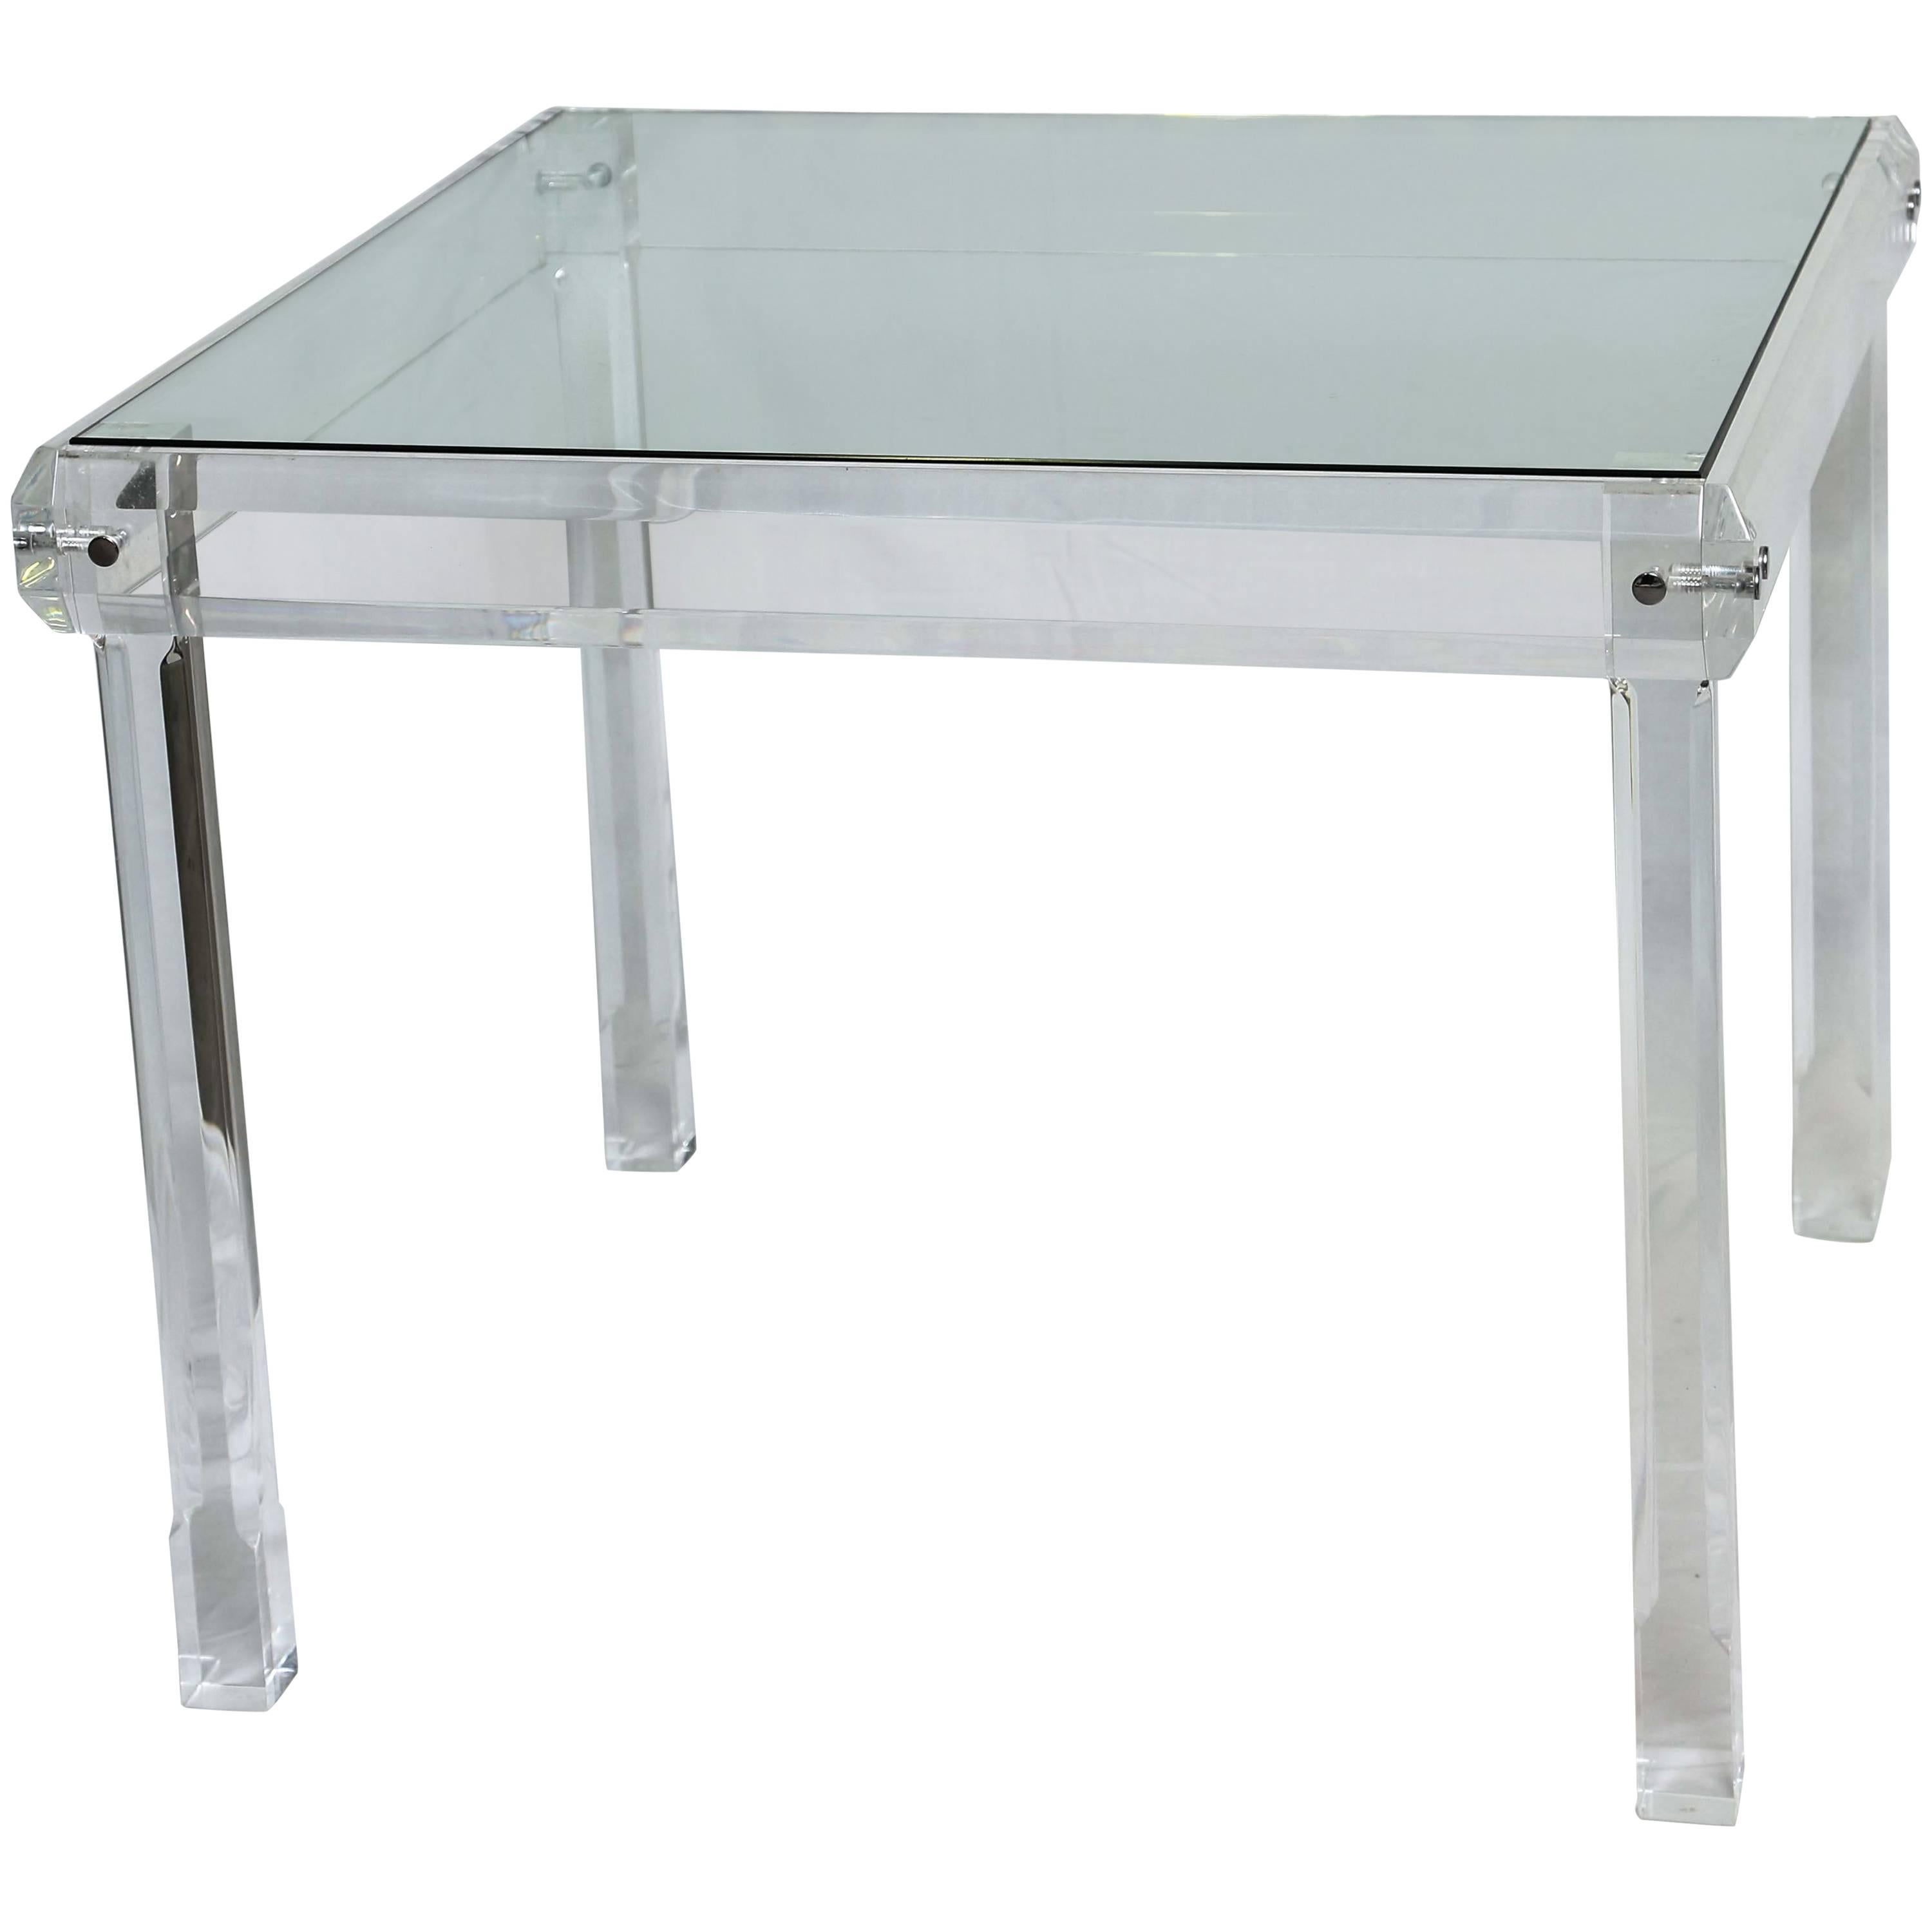  Midcentury Breakfast Table, Vintage, Beveled Lucite with Two-Inch Thick Solid 